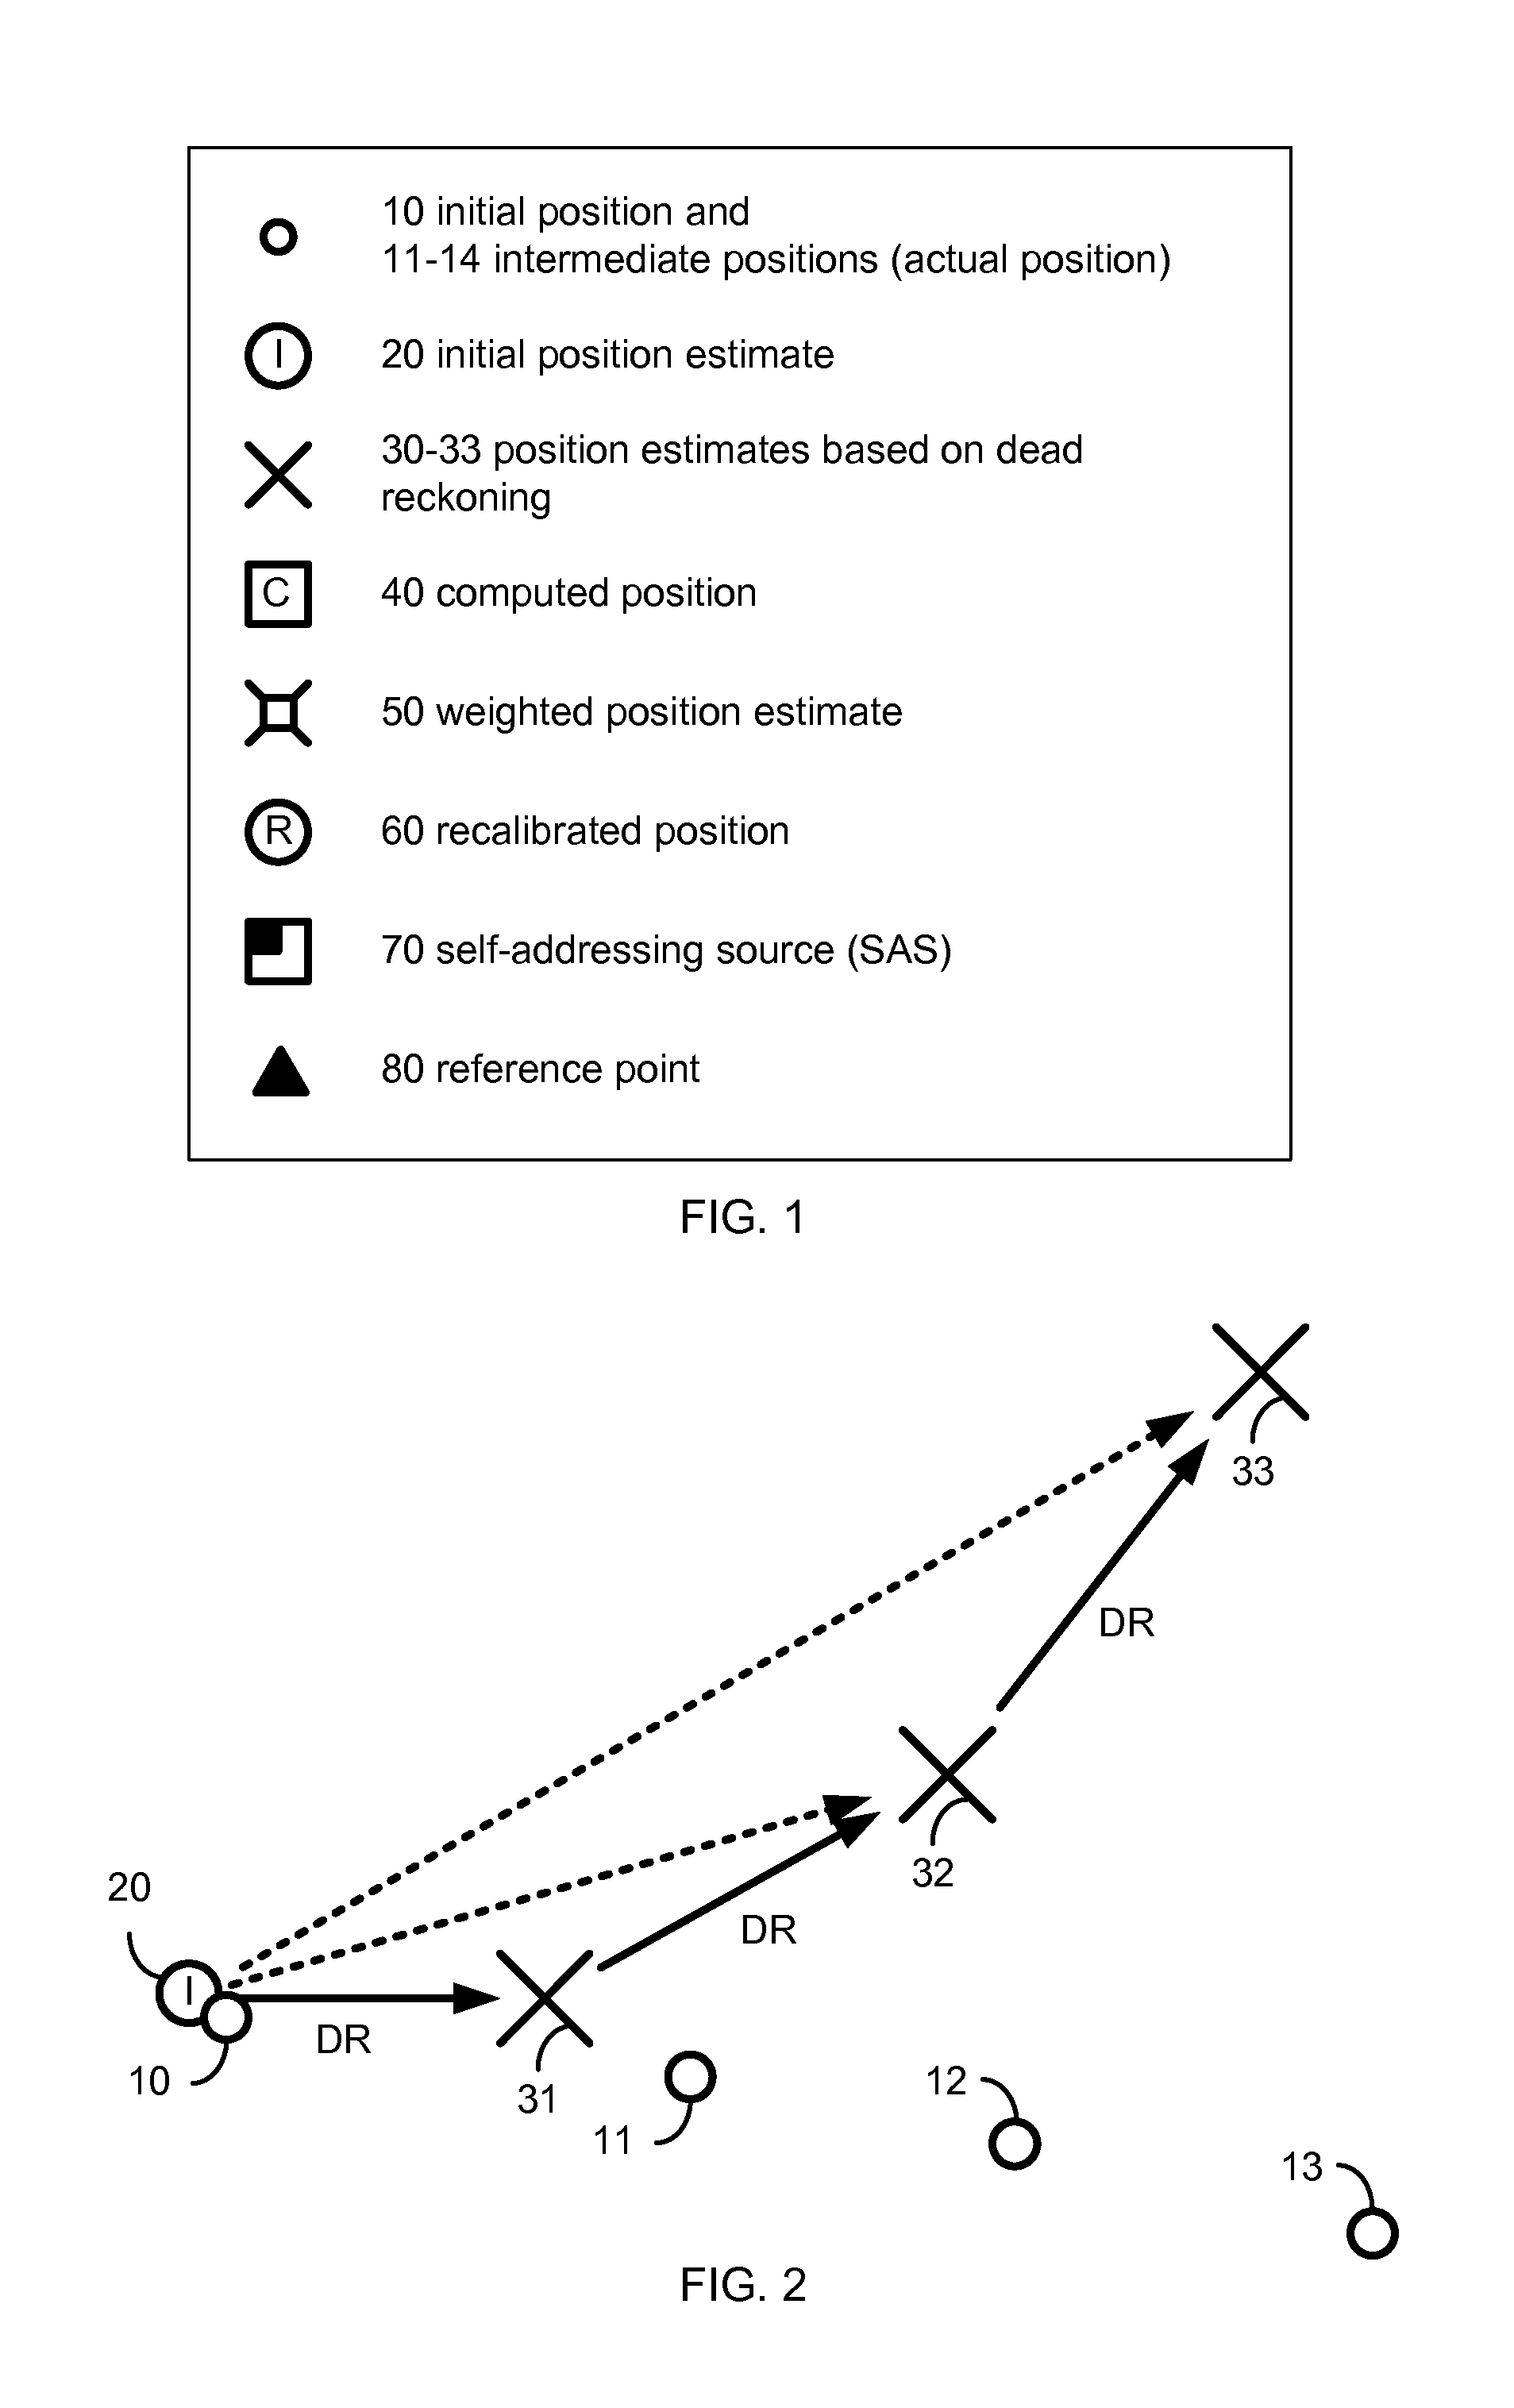 Camera-based position location and navigation based on image processing